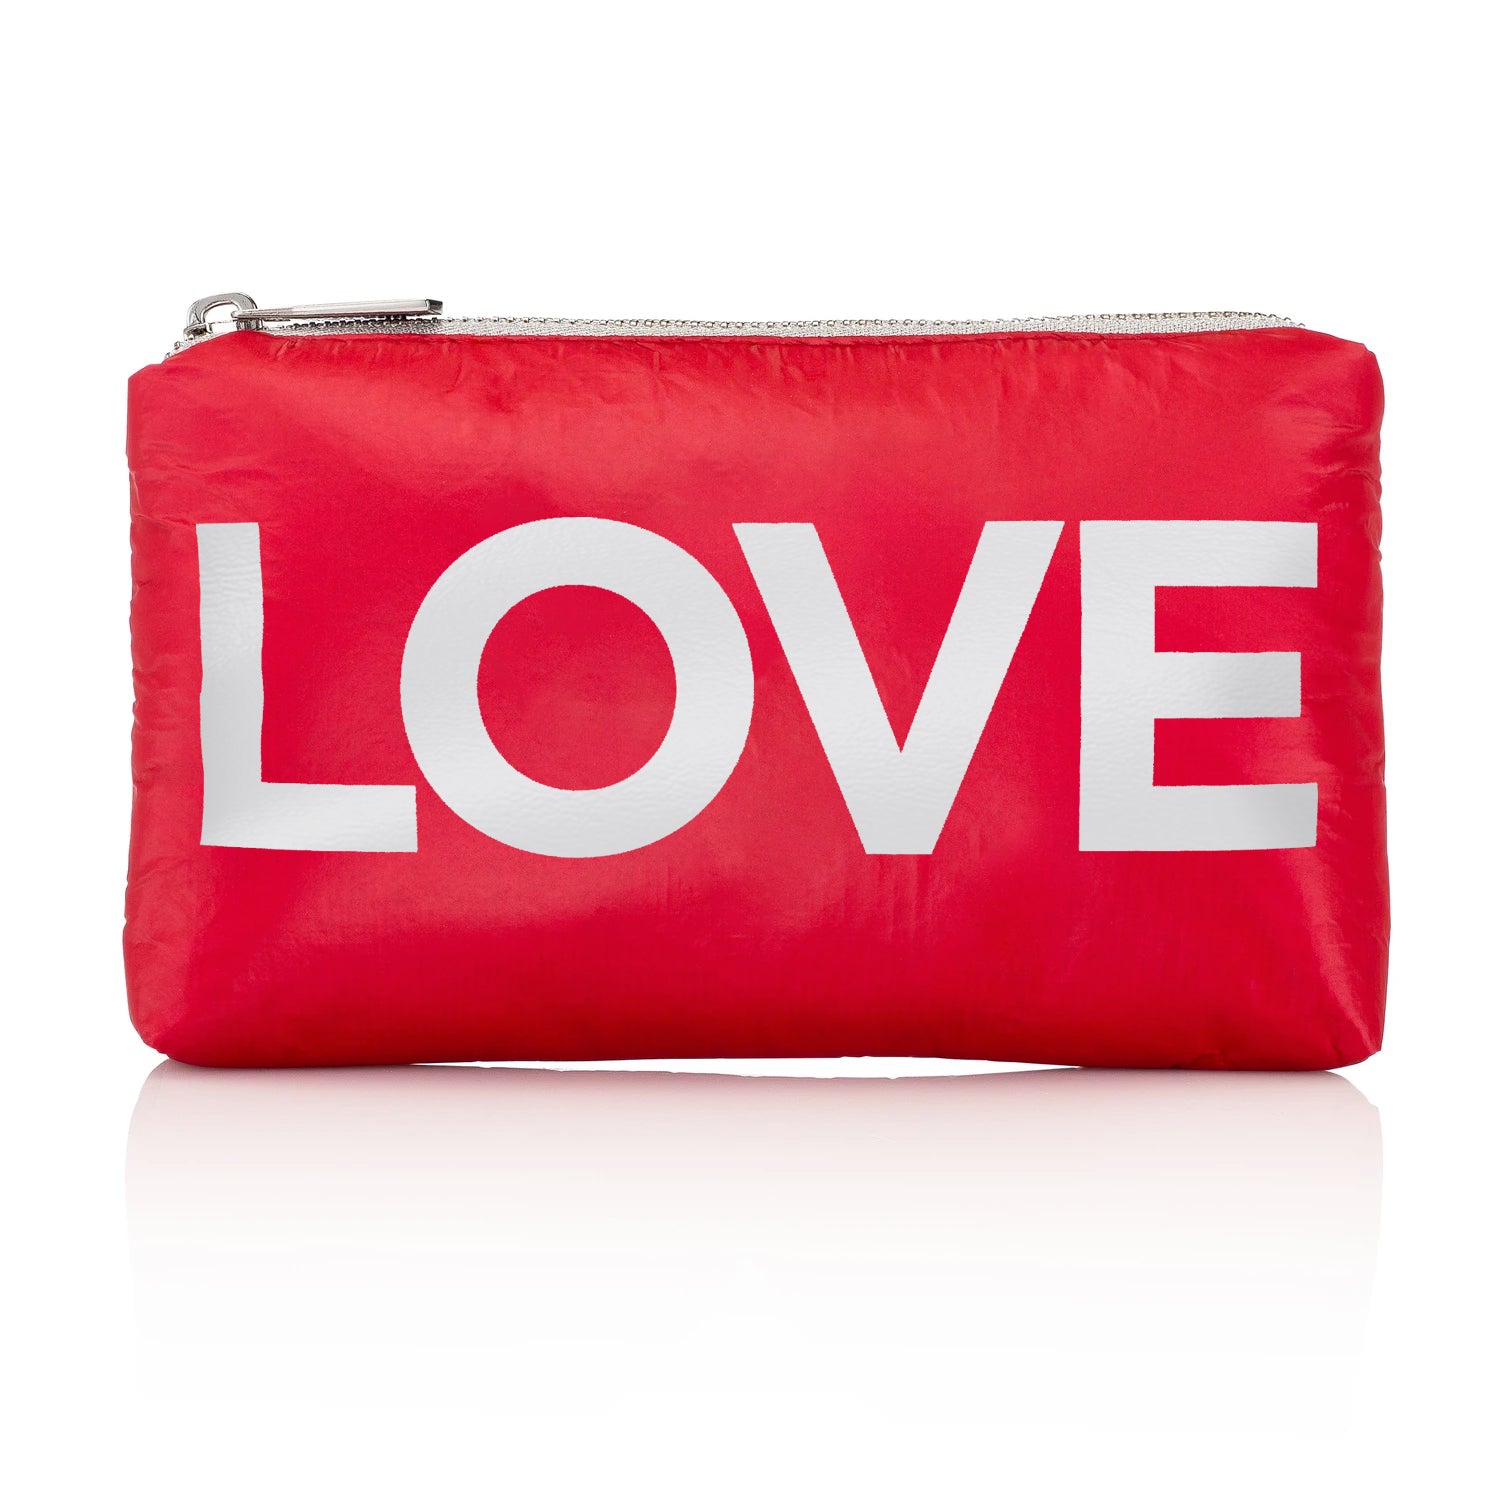 Holiday Makeup Pouch - Chic Clutch - Mini Padded Pack - Chili Pepper Red with Metallic Silver "LOVE"